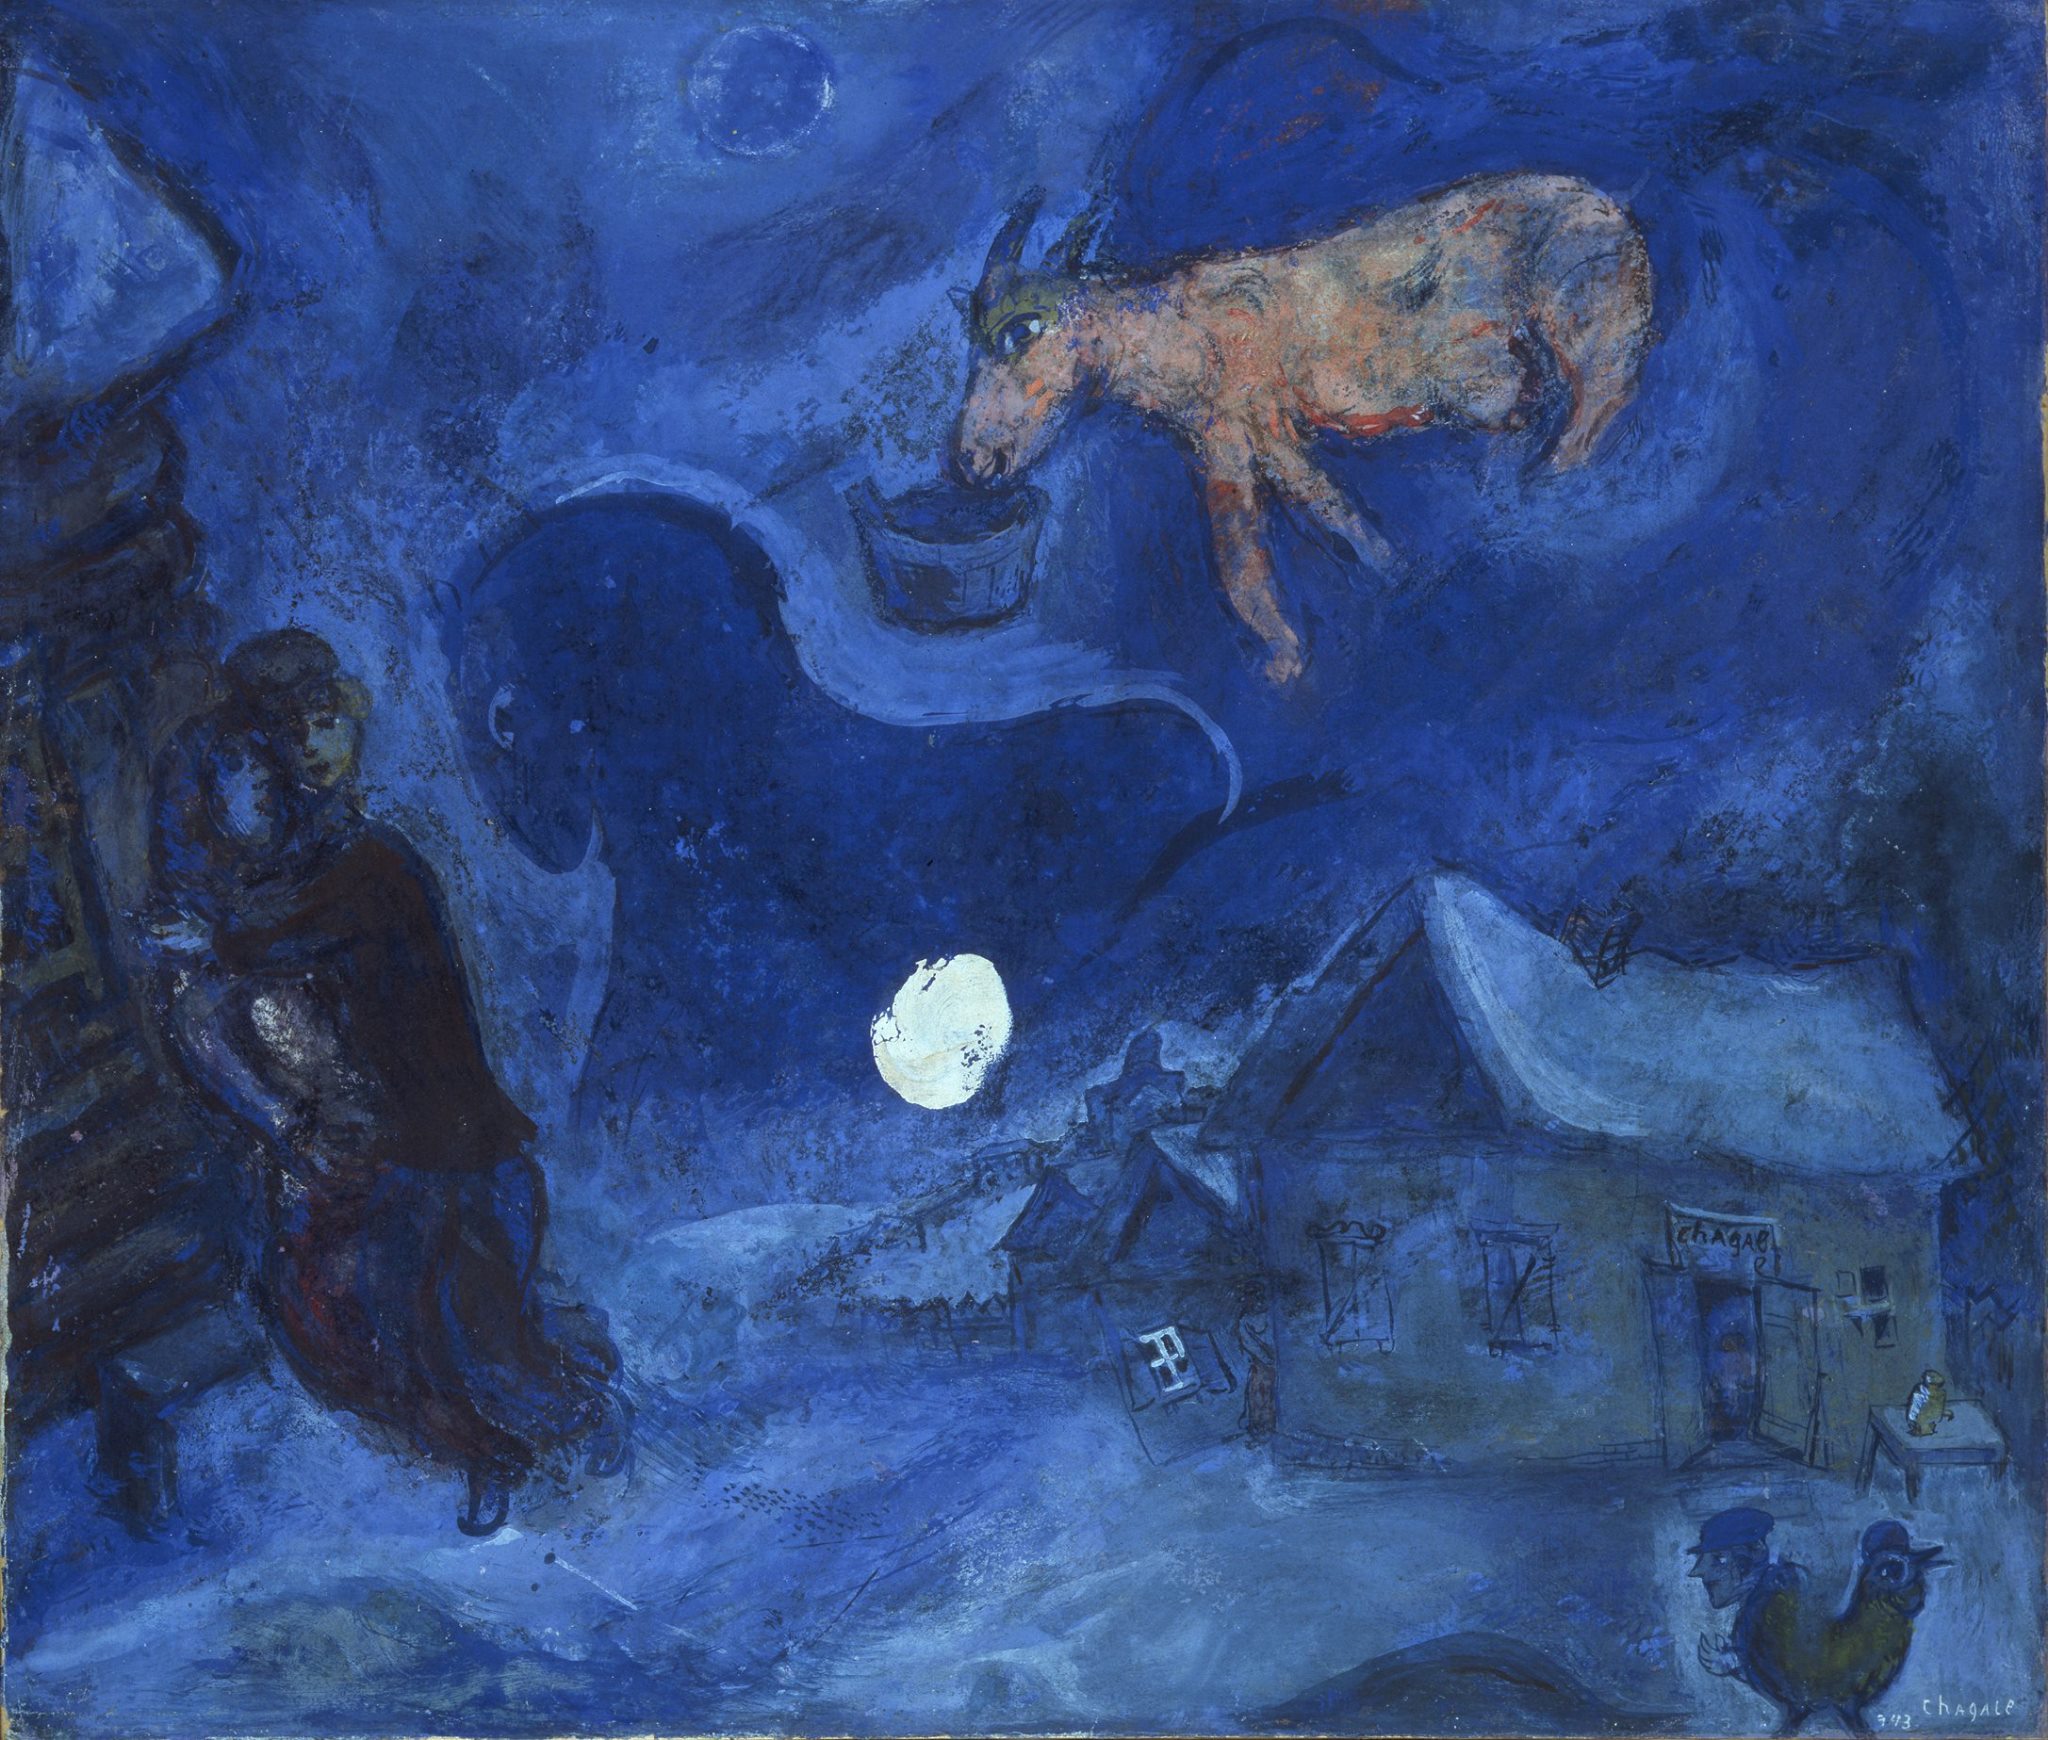 In Mijn Land by Marc Chagall - 1943 - 57,2 x 49,7 cm 